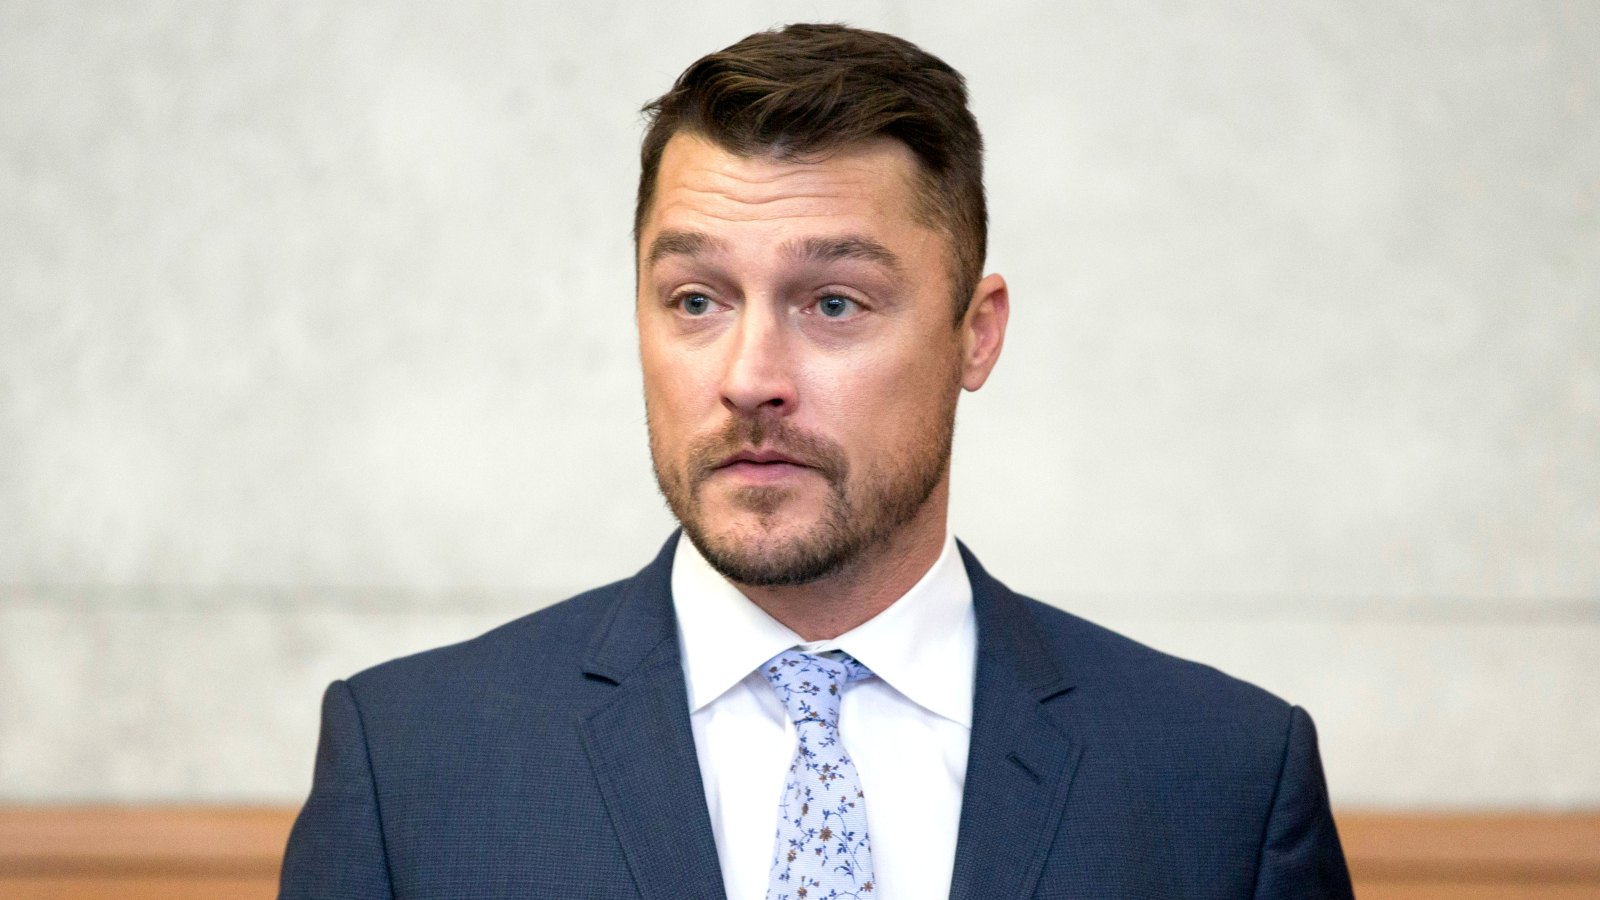 Chris Soules Says He Had ‘Nothing Left to Live for’ After Fatal Car Crash